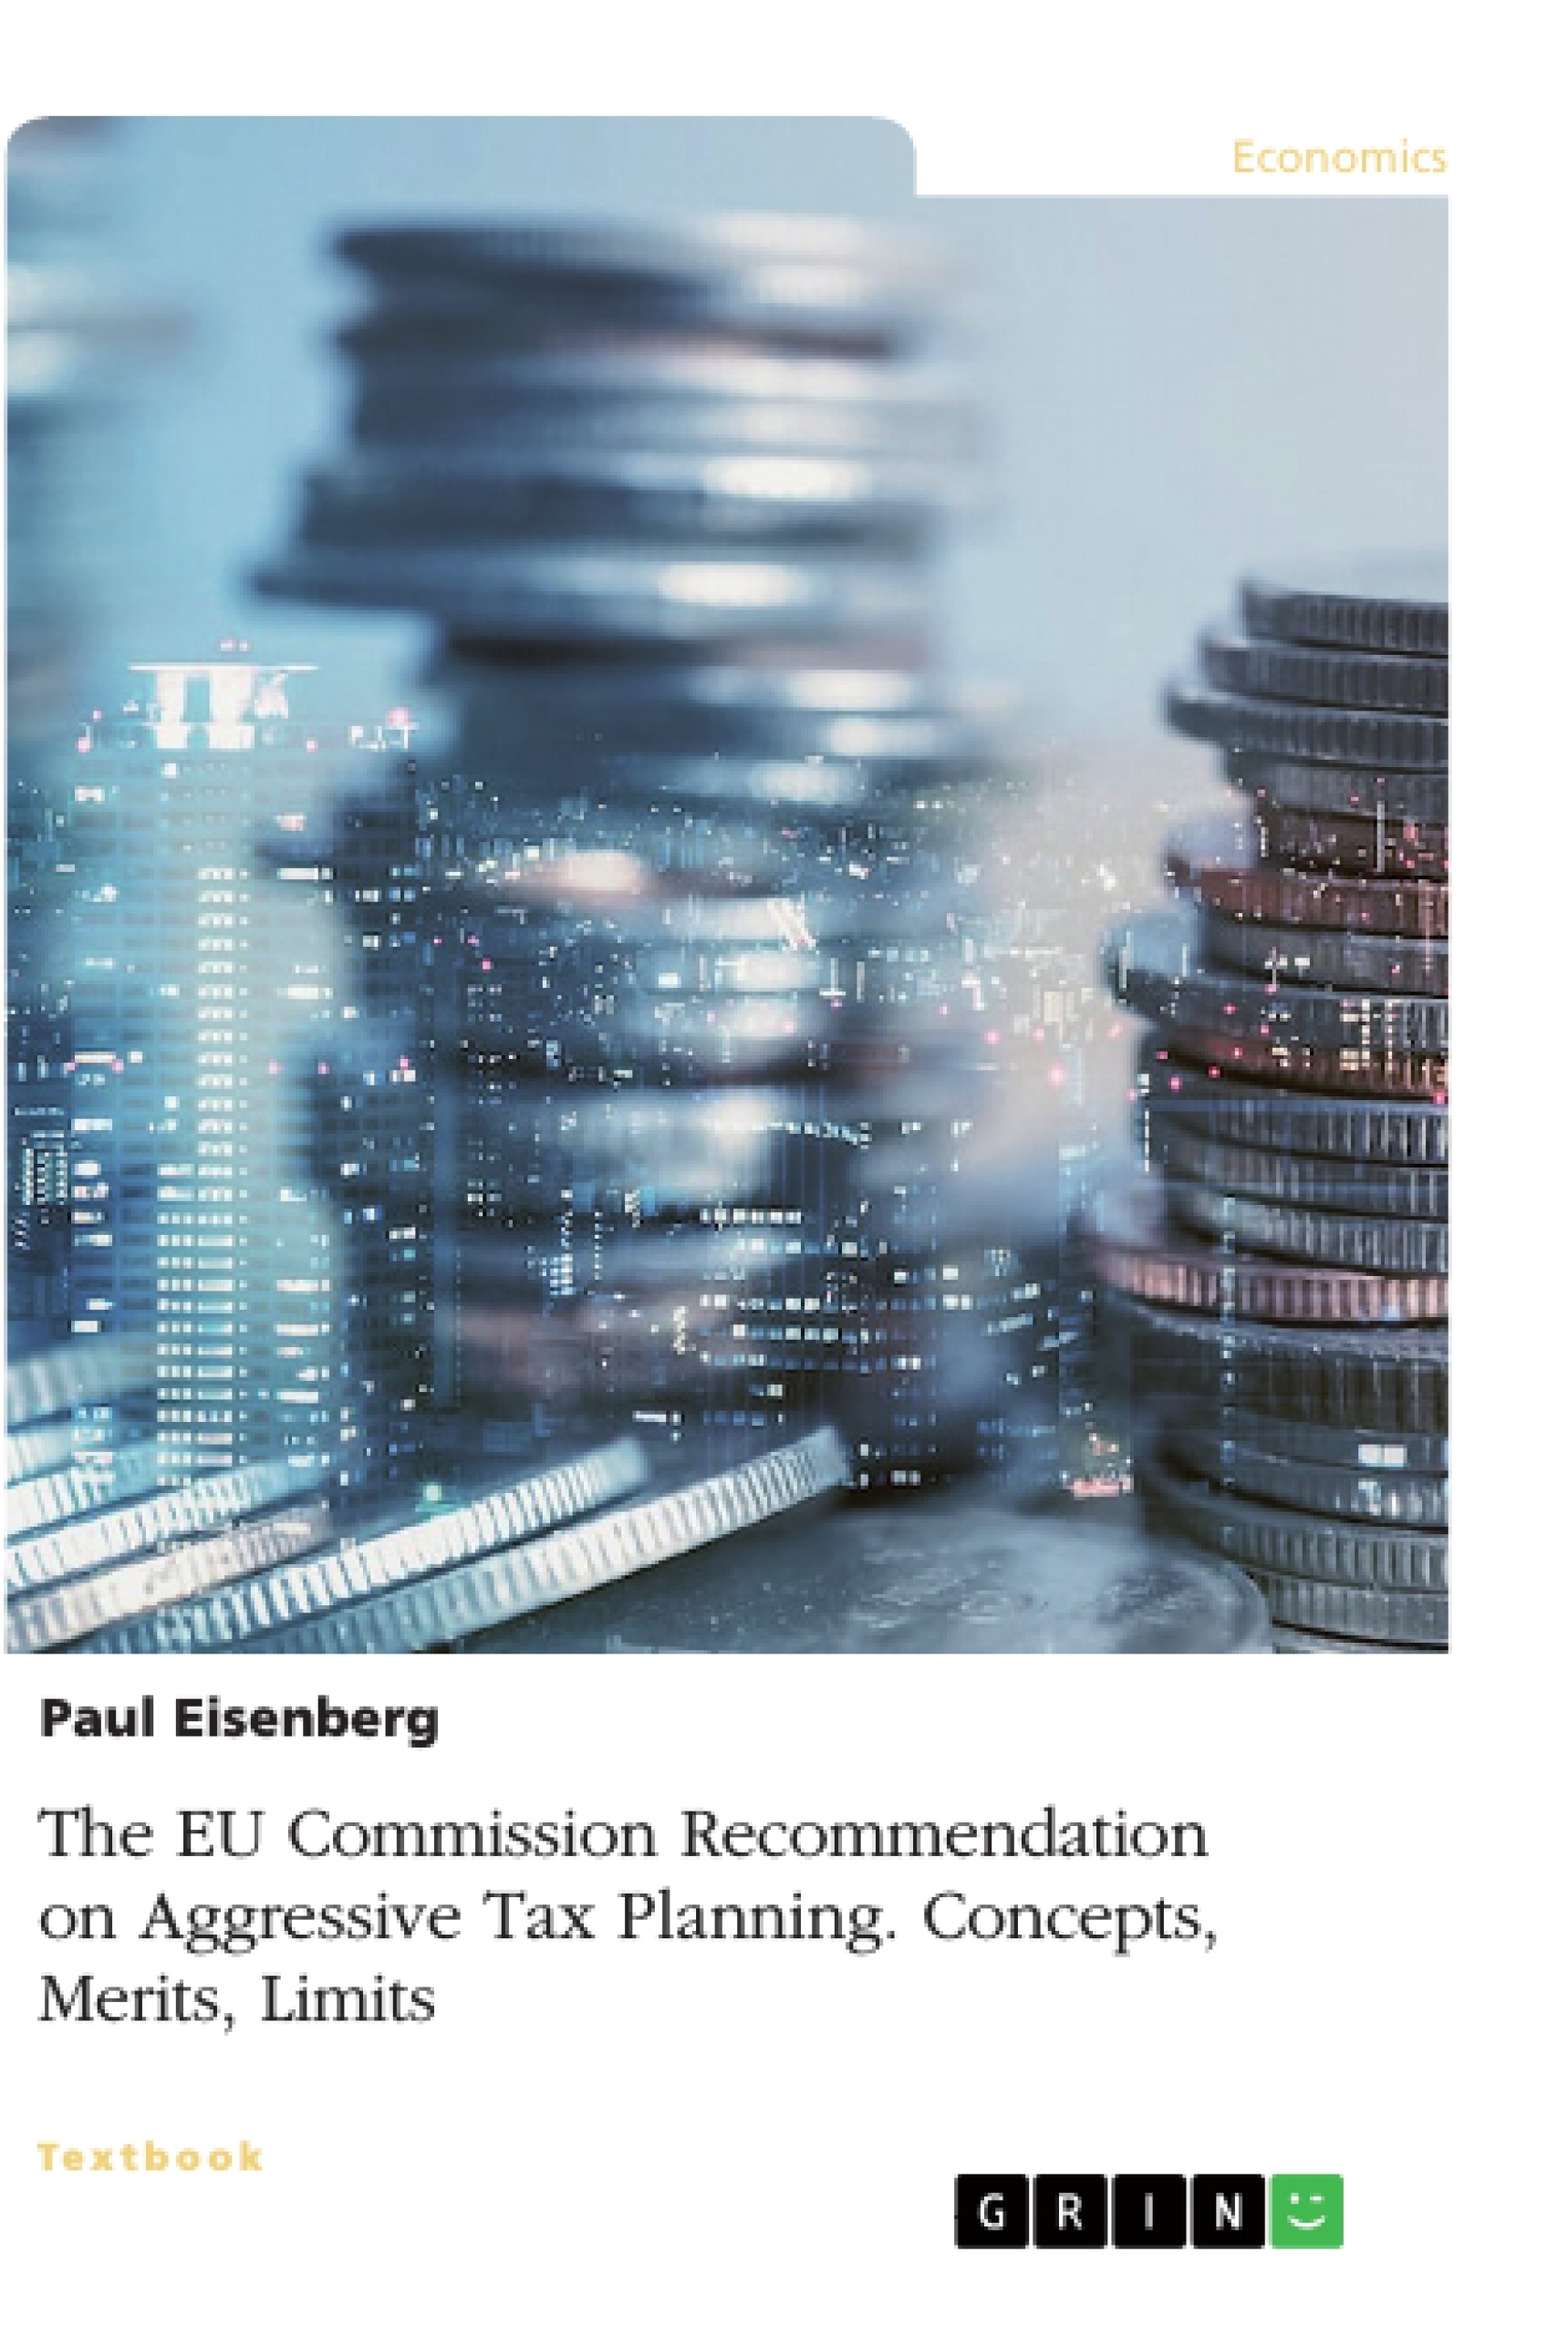 Título: The EU Commission Recommendation on Aggressive Tax Planning. Concepts, Merits, Limits